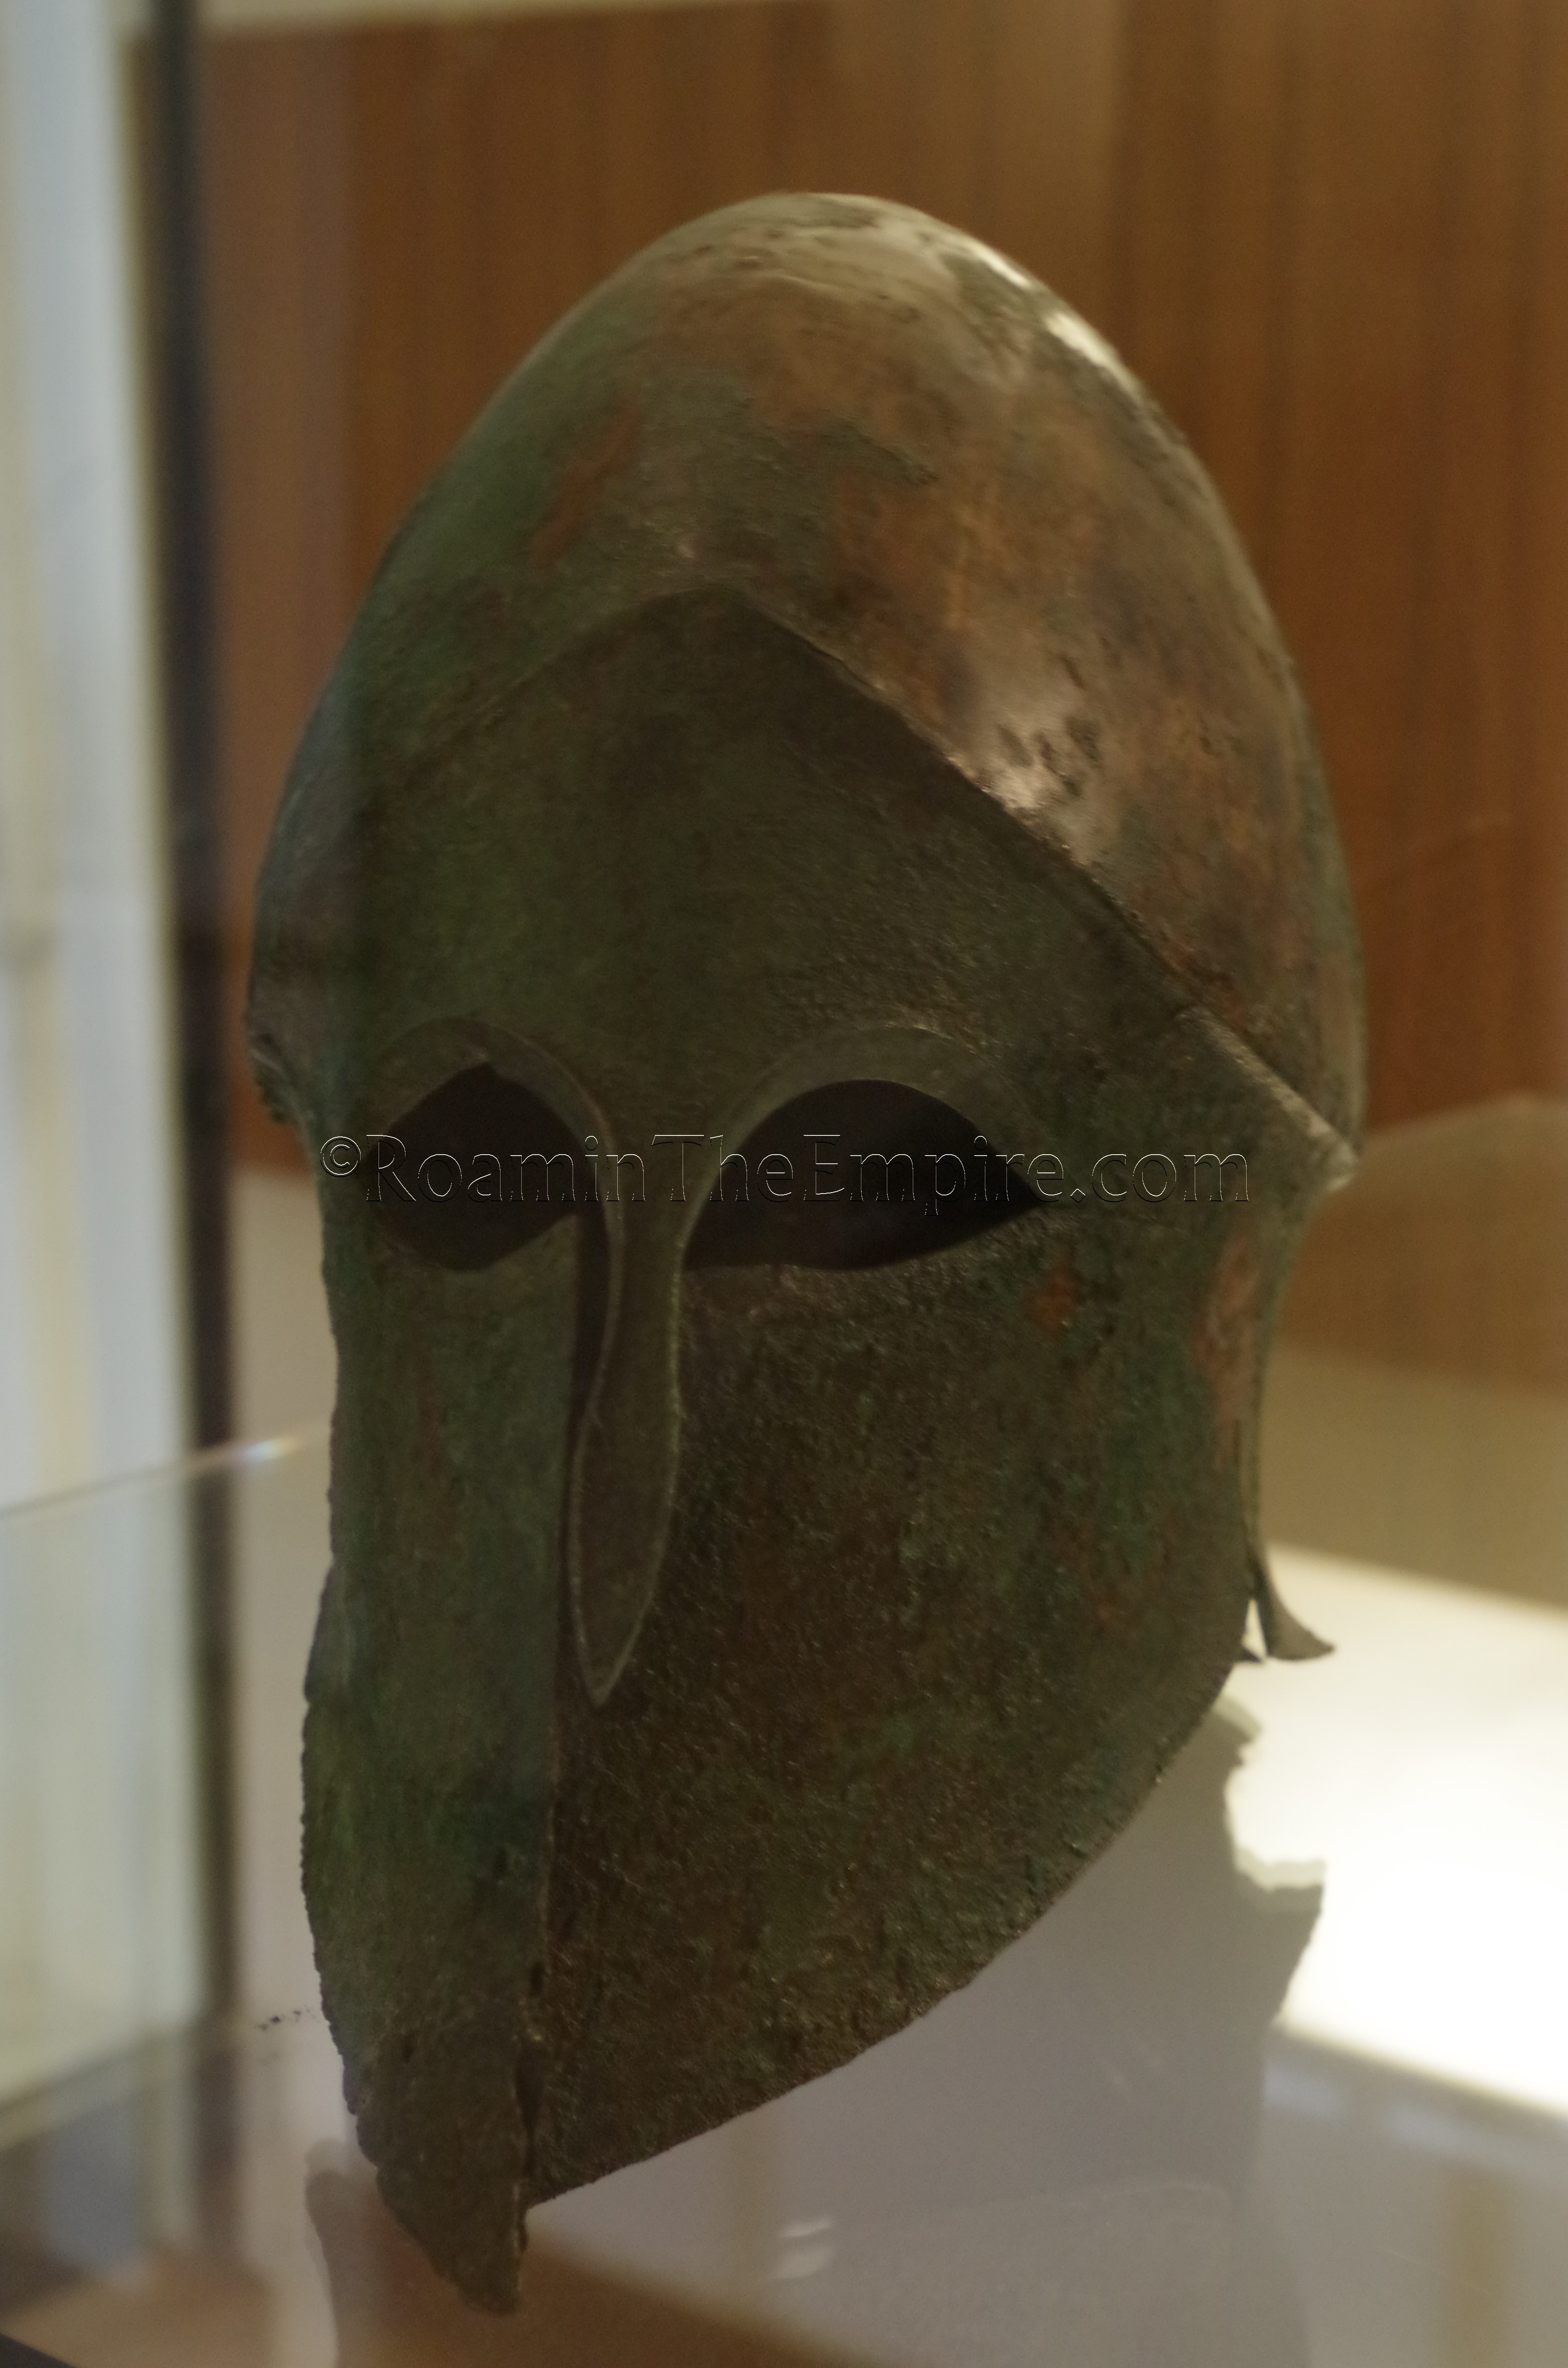 Corinthian helmet from the Montagna di Marzo necropolis, displayed in the archaeological museum.